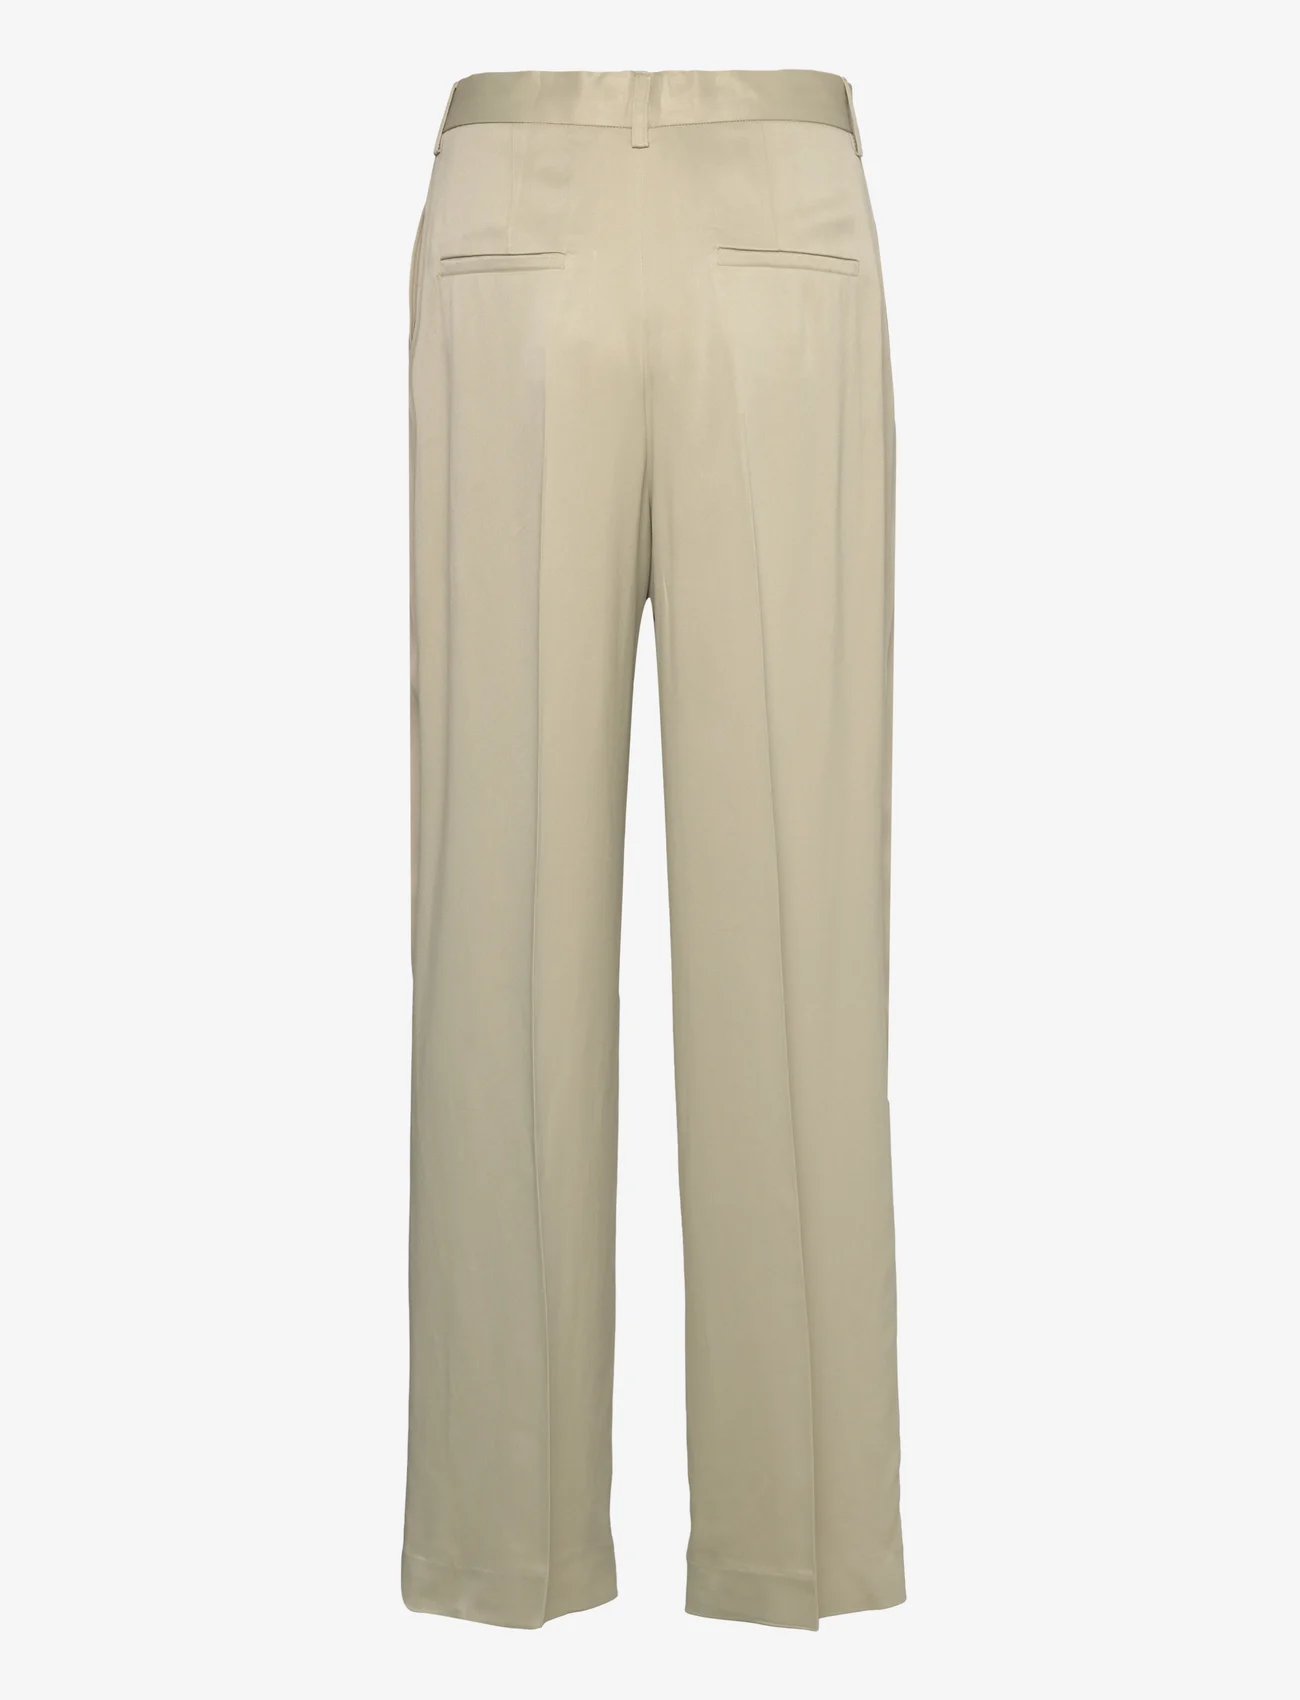 House Of Dagmar - WIDE SUIT PANT - tailored trousers - slate green - 1